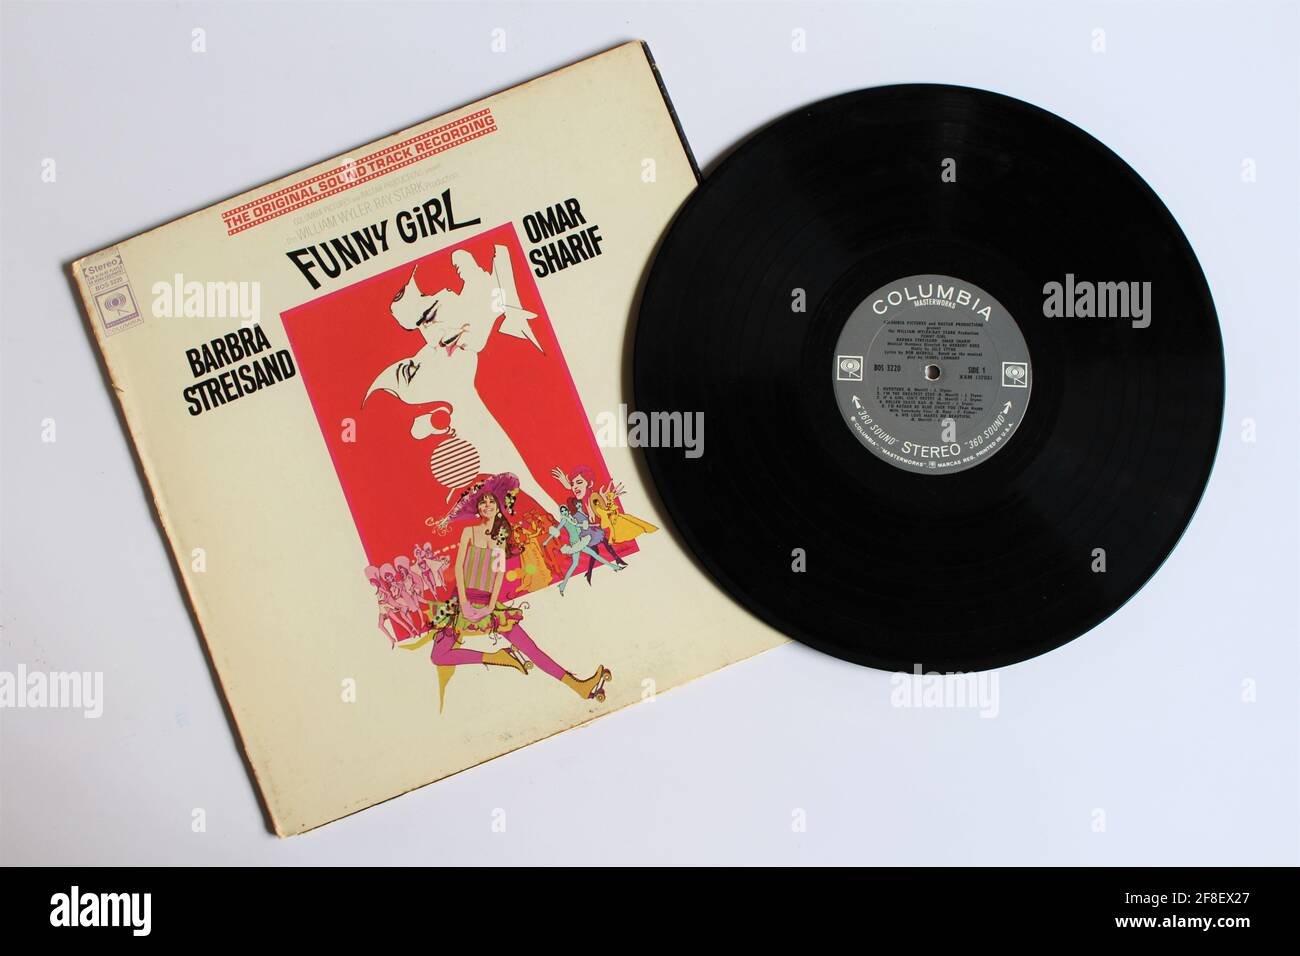 Funny Girl is a 1968 American biographical musical comedy-drama film directed by William Wyler. Soundtrack album on vinyl record LP disc. Stock Photo